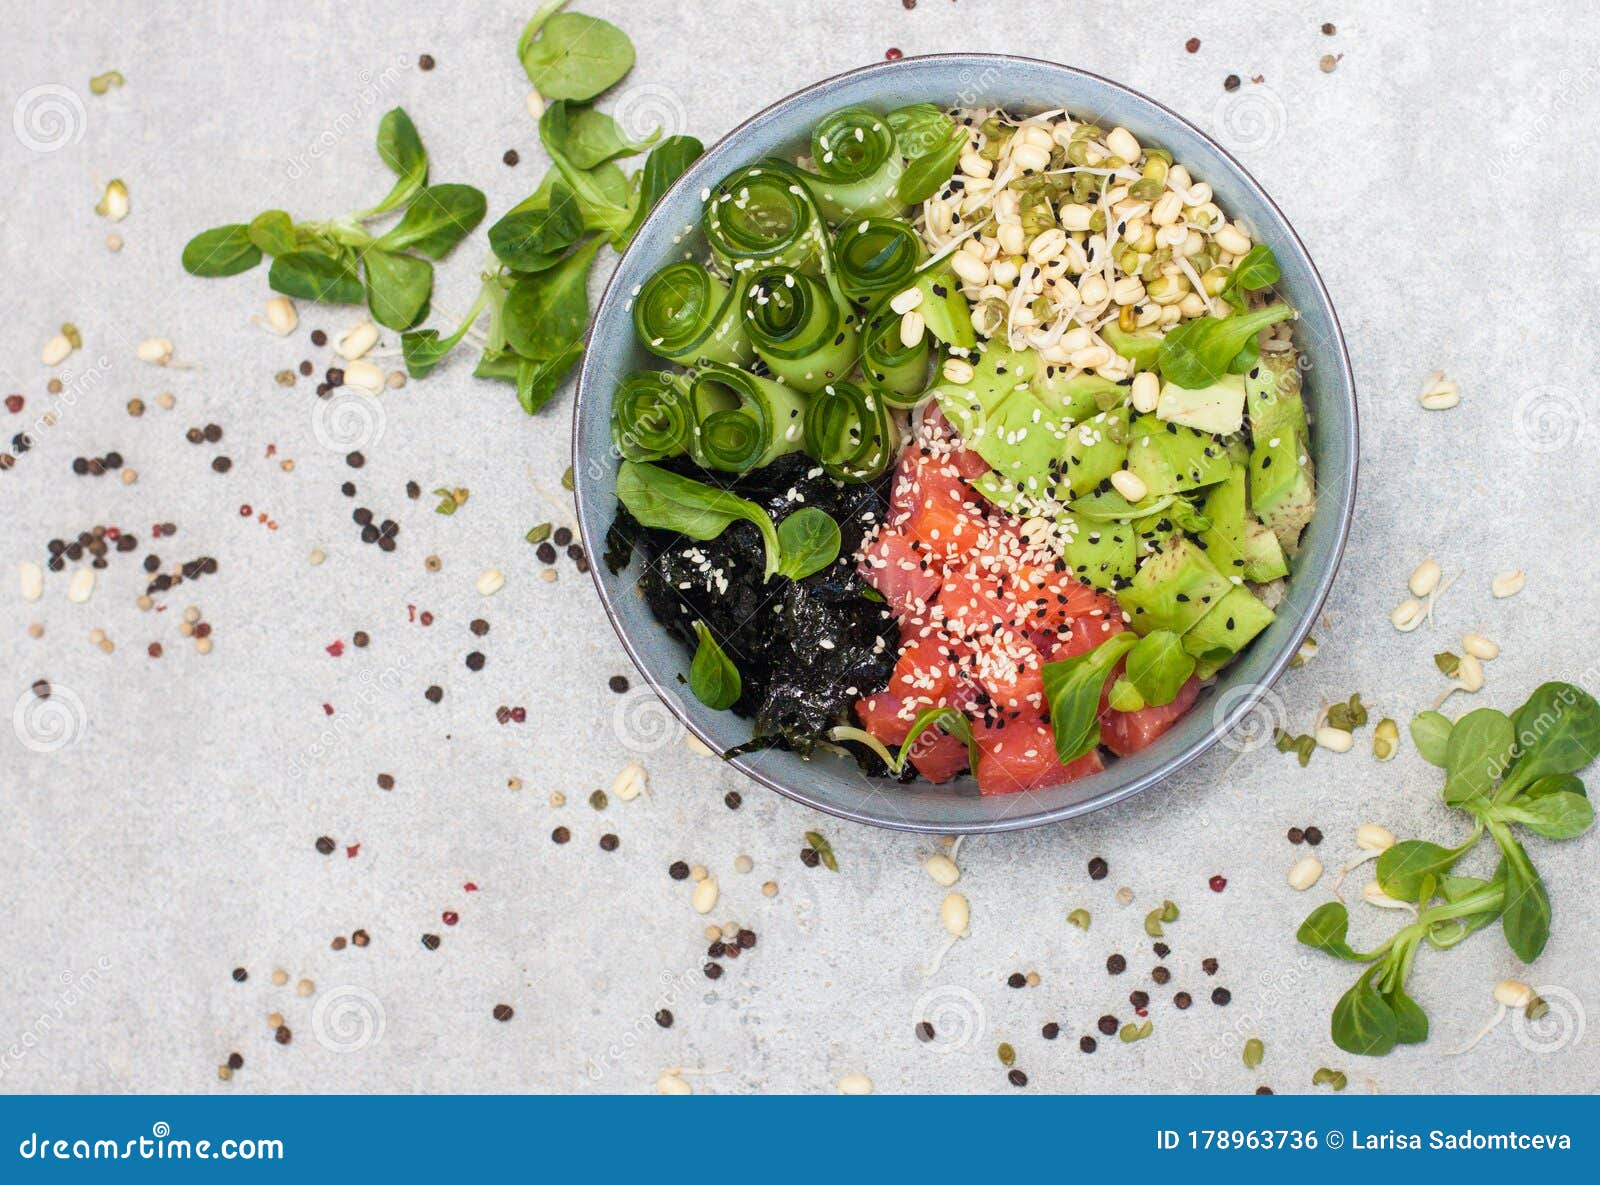 https://thumbs.dreamstime.com/z/poke-bowl-smoked-salmon-cucumber-avocado-sea-kale-bean-sprouts-sesame-herbs-grey-background-copy-space-baby-spinach-178963736.jpg